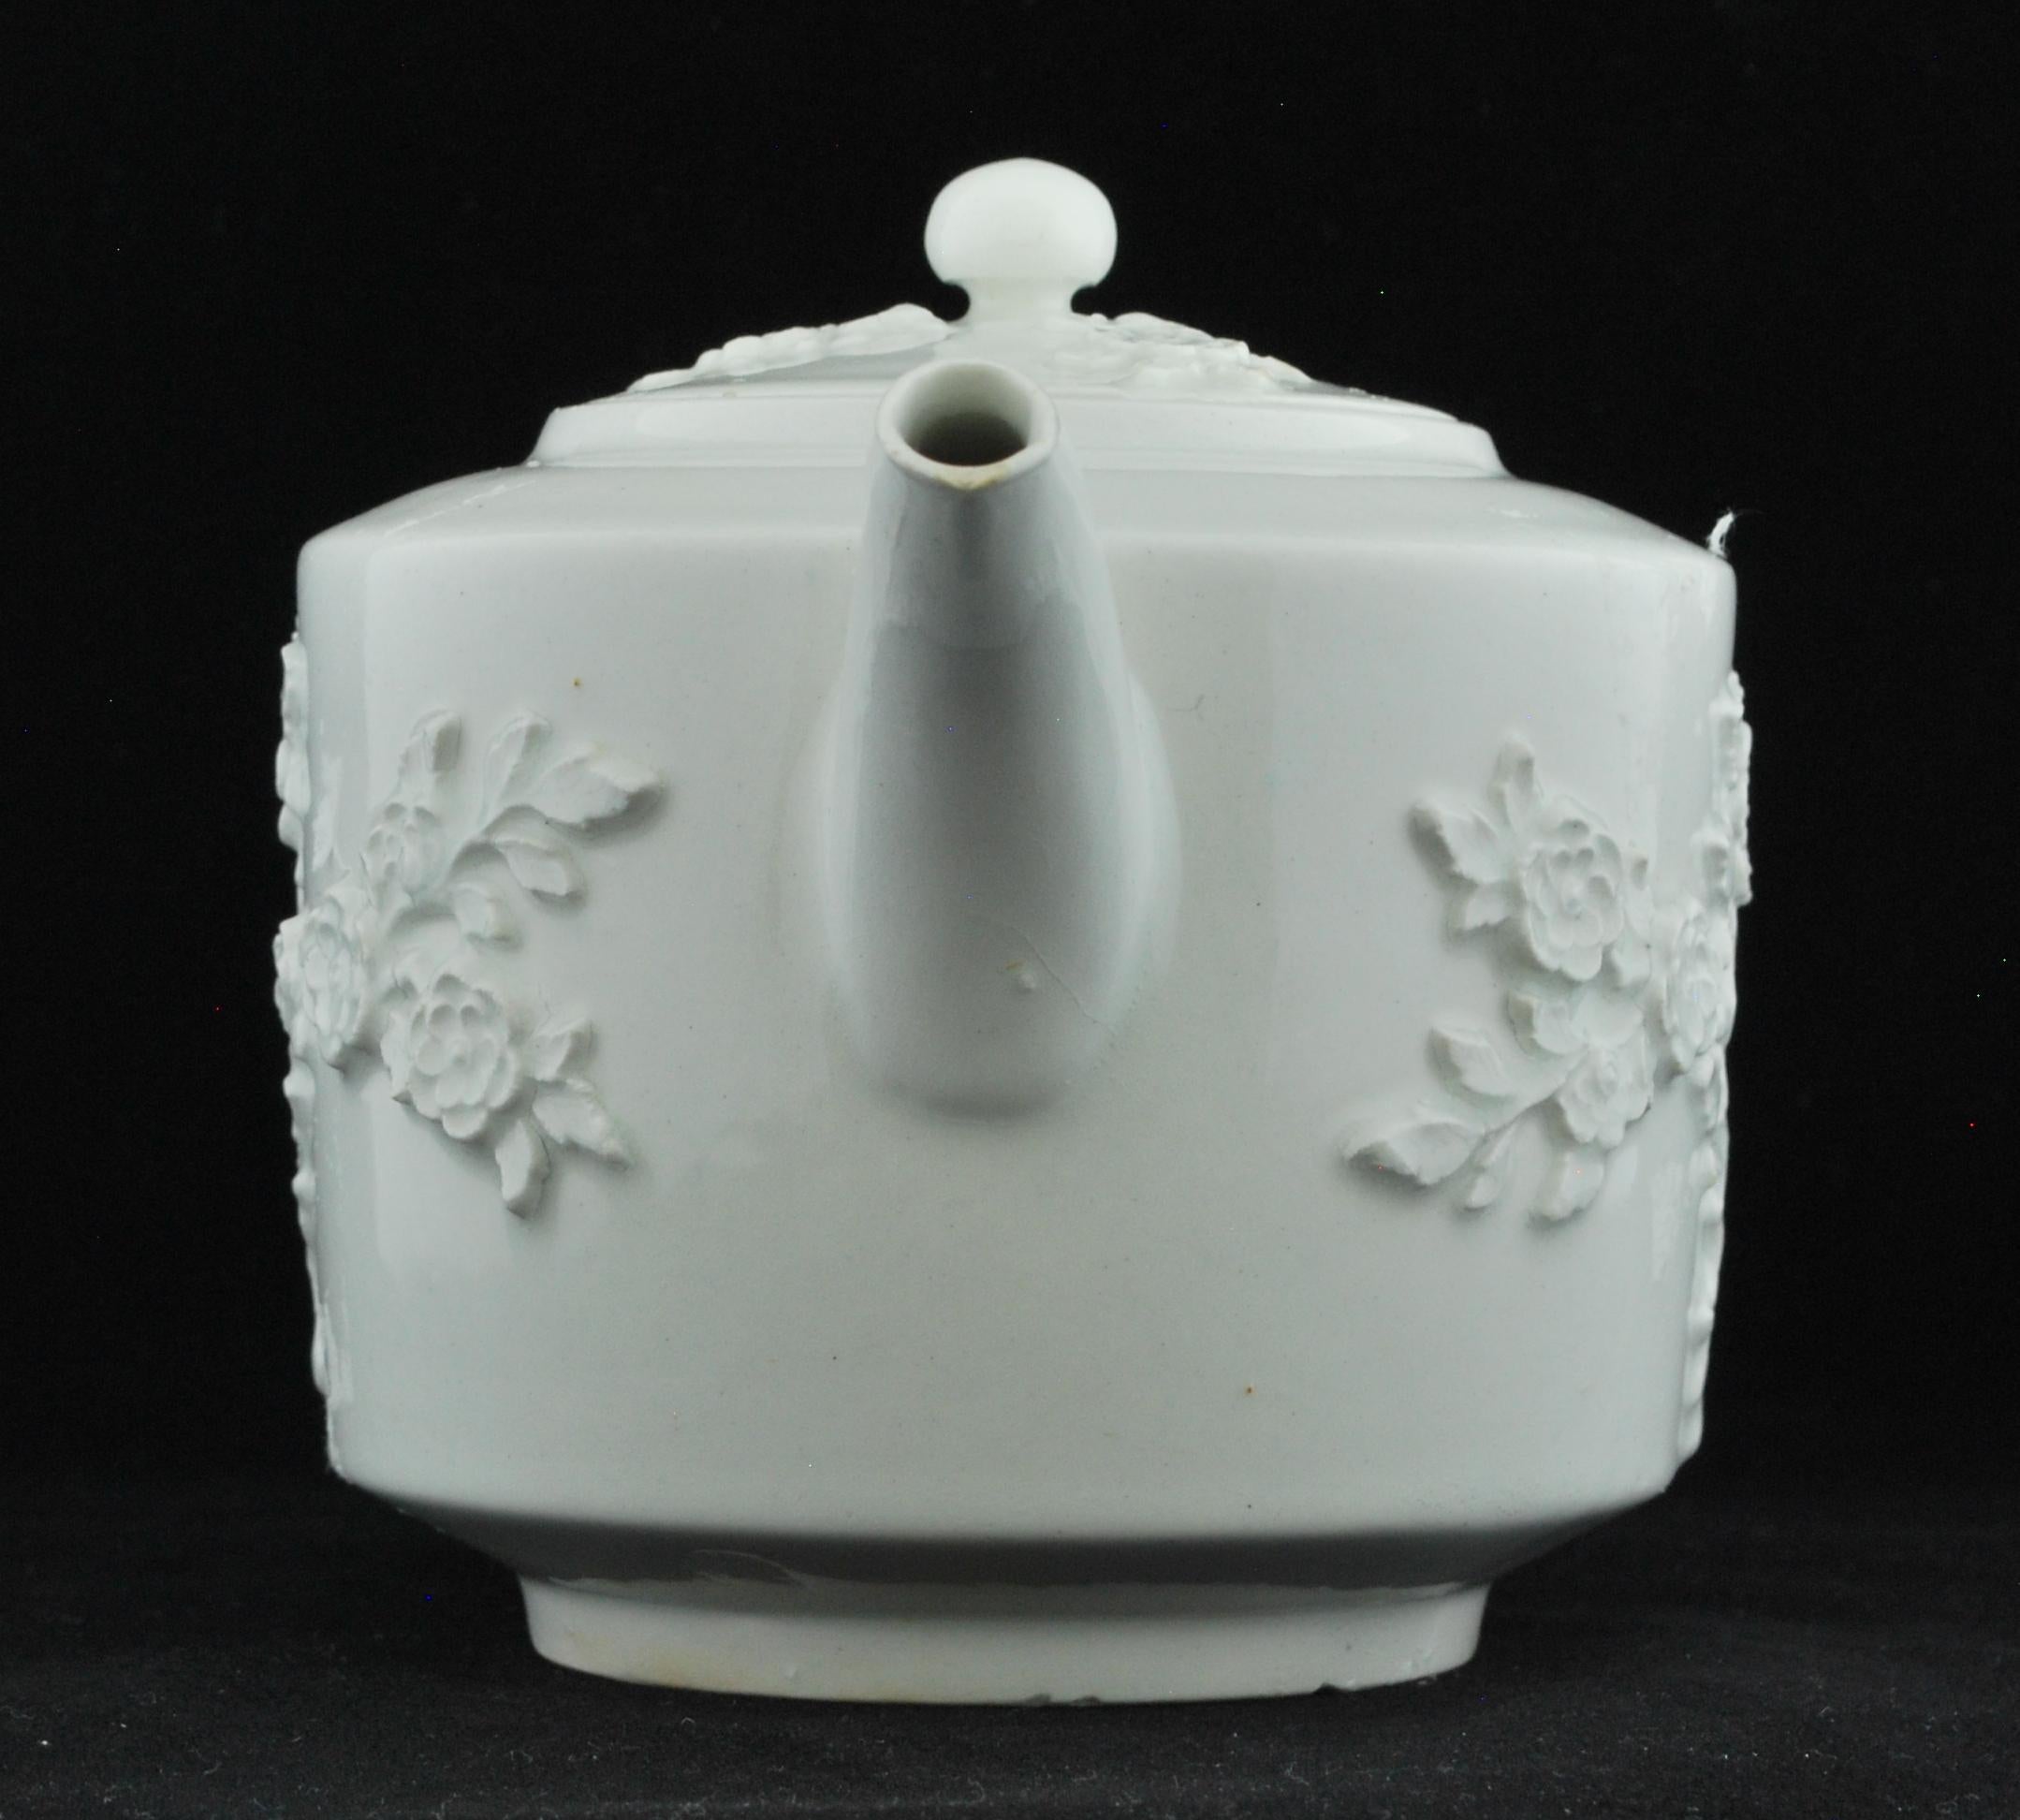 Drum-shape teapot with applied double-prunus decoration, in imitation of the Chinese. Pots of this form and date are rare, and this example is unusual in the quality of its body and glaze and the lavishly applied prunus decoration.

Ceramics bills